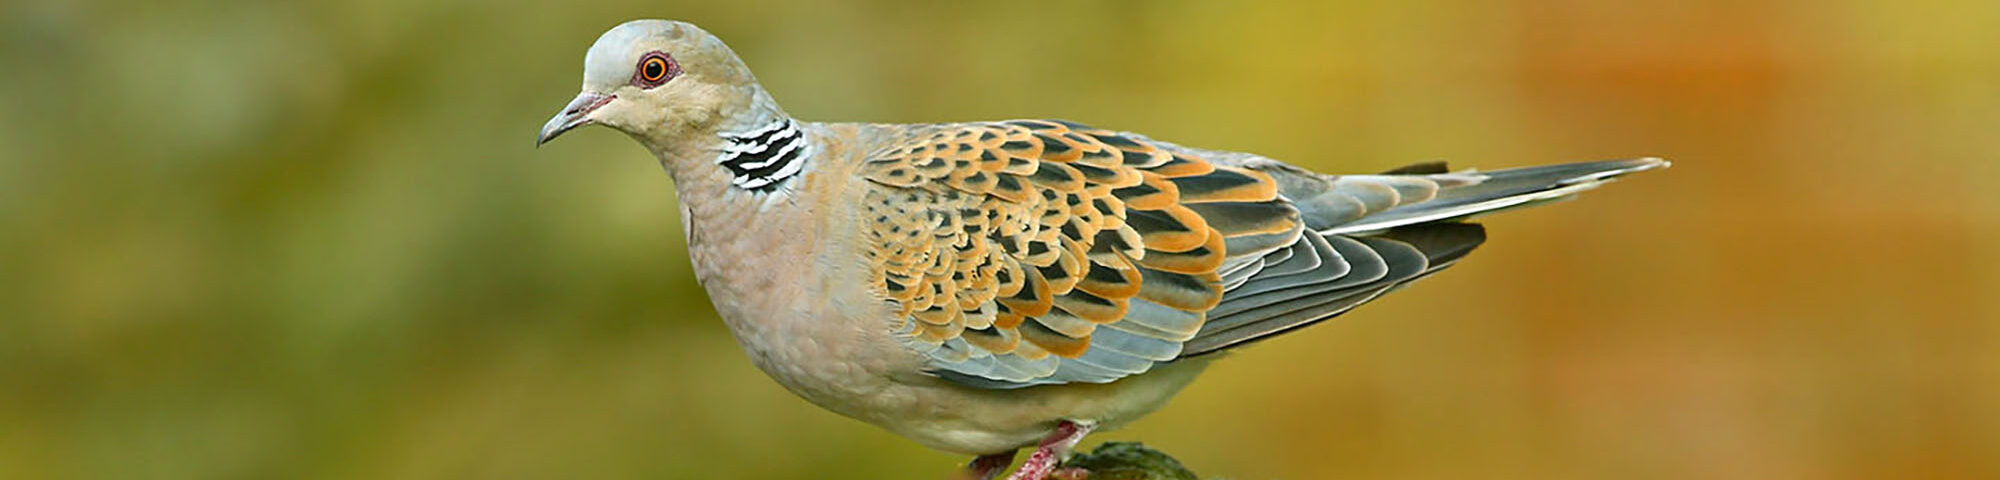 Turtle Dove on a stone